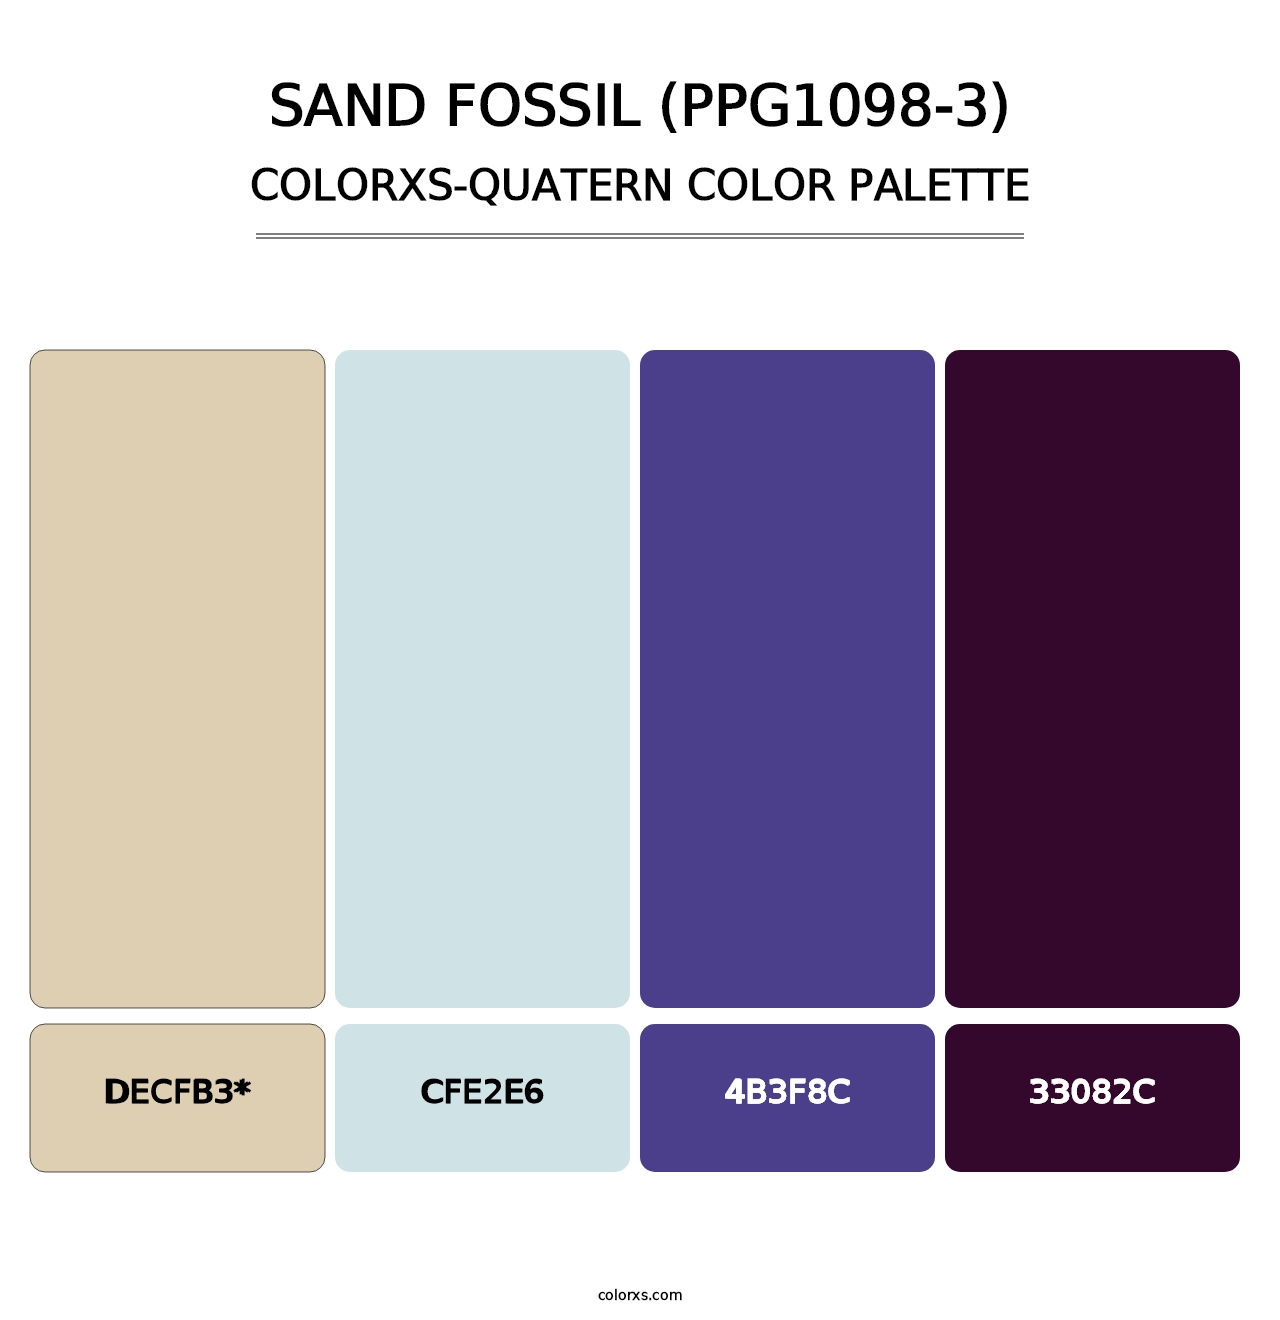 Sand Fossil (PPG1098-3) - Colorxs Quatern Palette